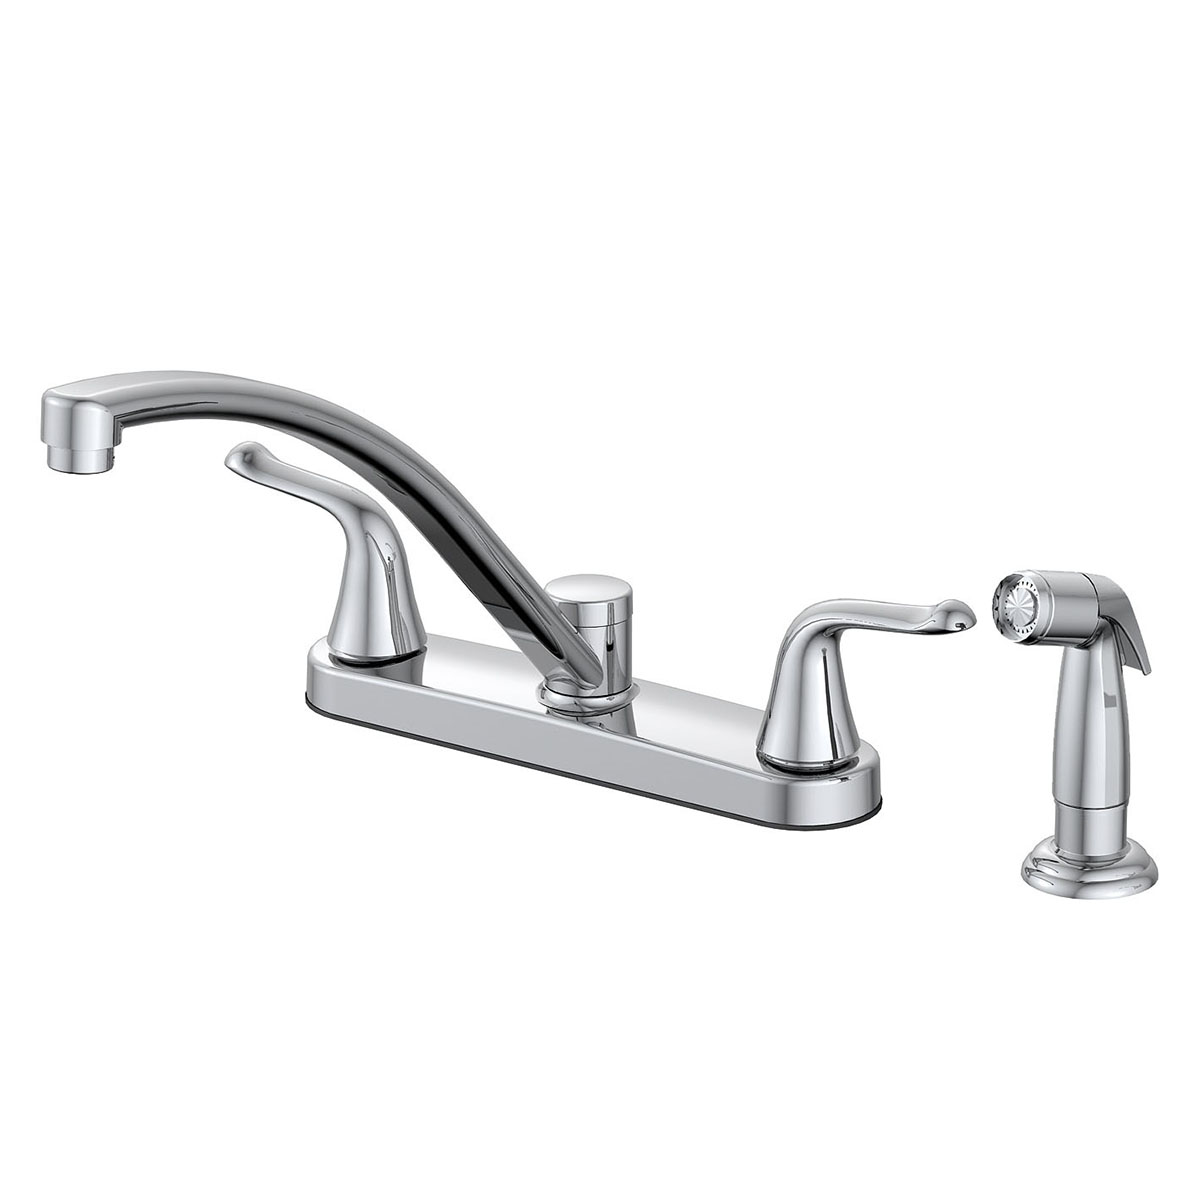 Commercial Style Centerset Kitchen Faucet with Soap Dispenser